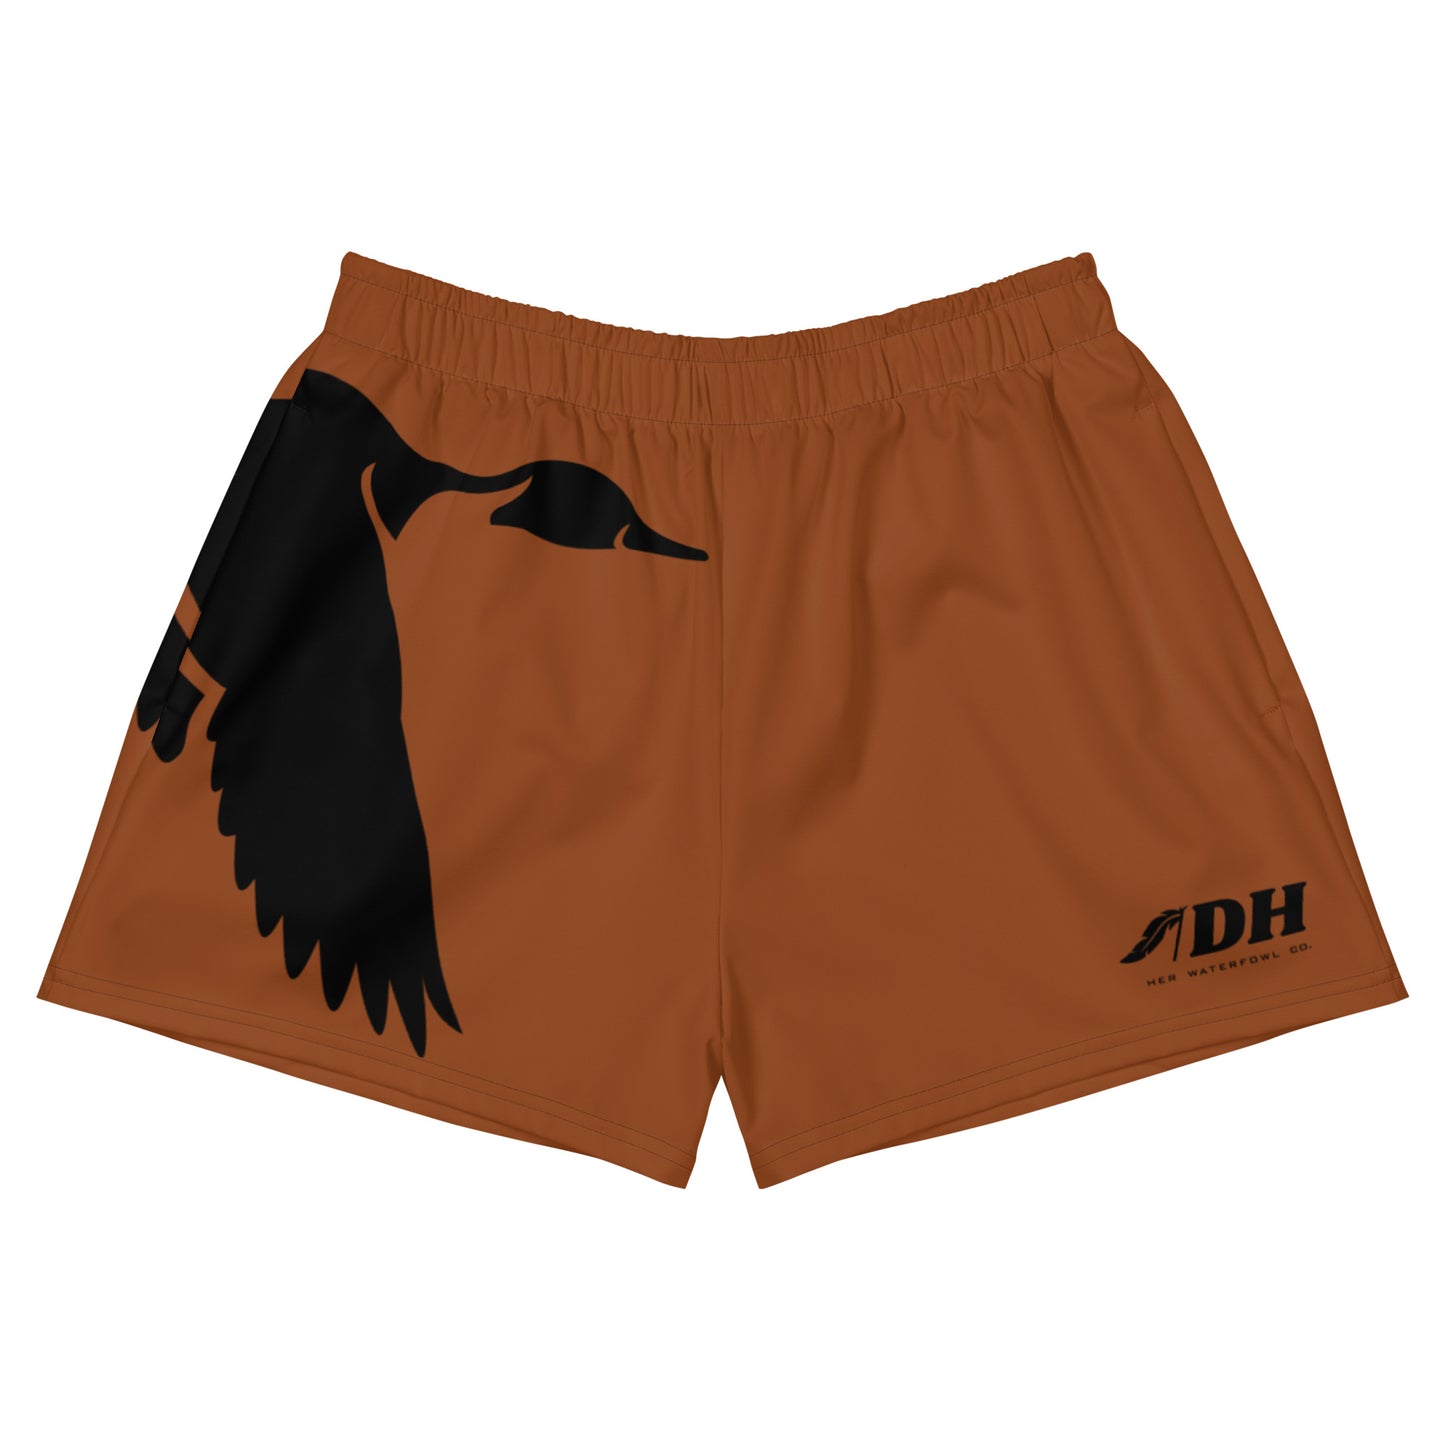 DH Pintail Athletic Shorts in Rust/Black